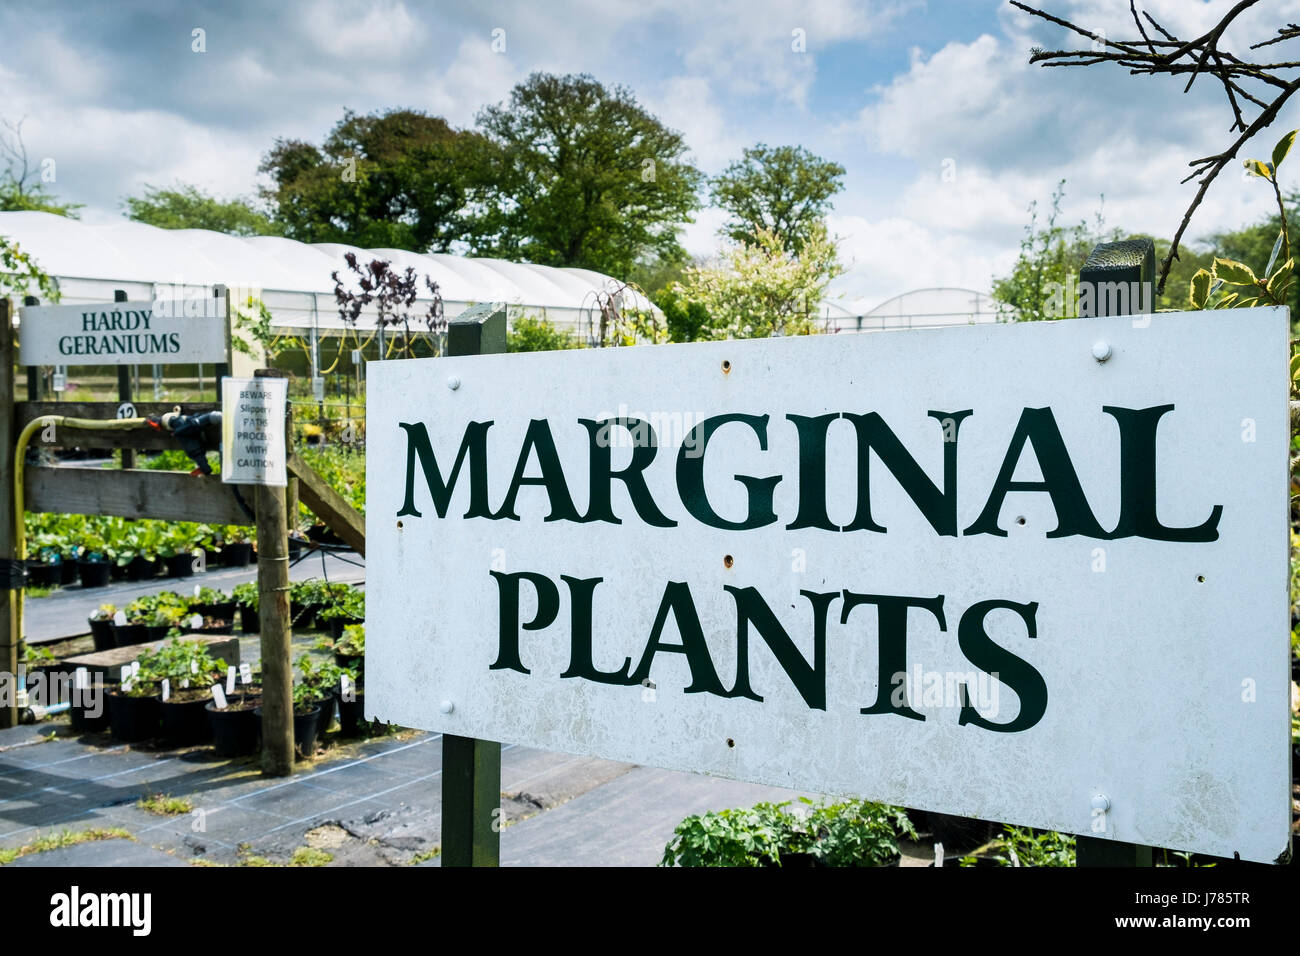 Plants on sale at a garden centre or Plant nursery. Stock Photo